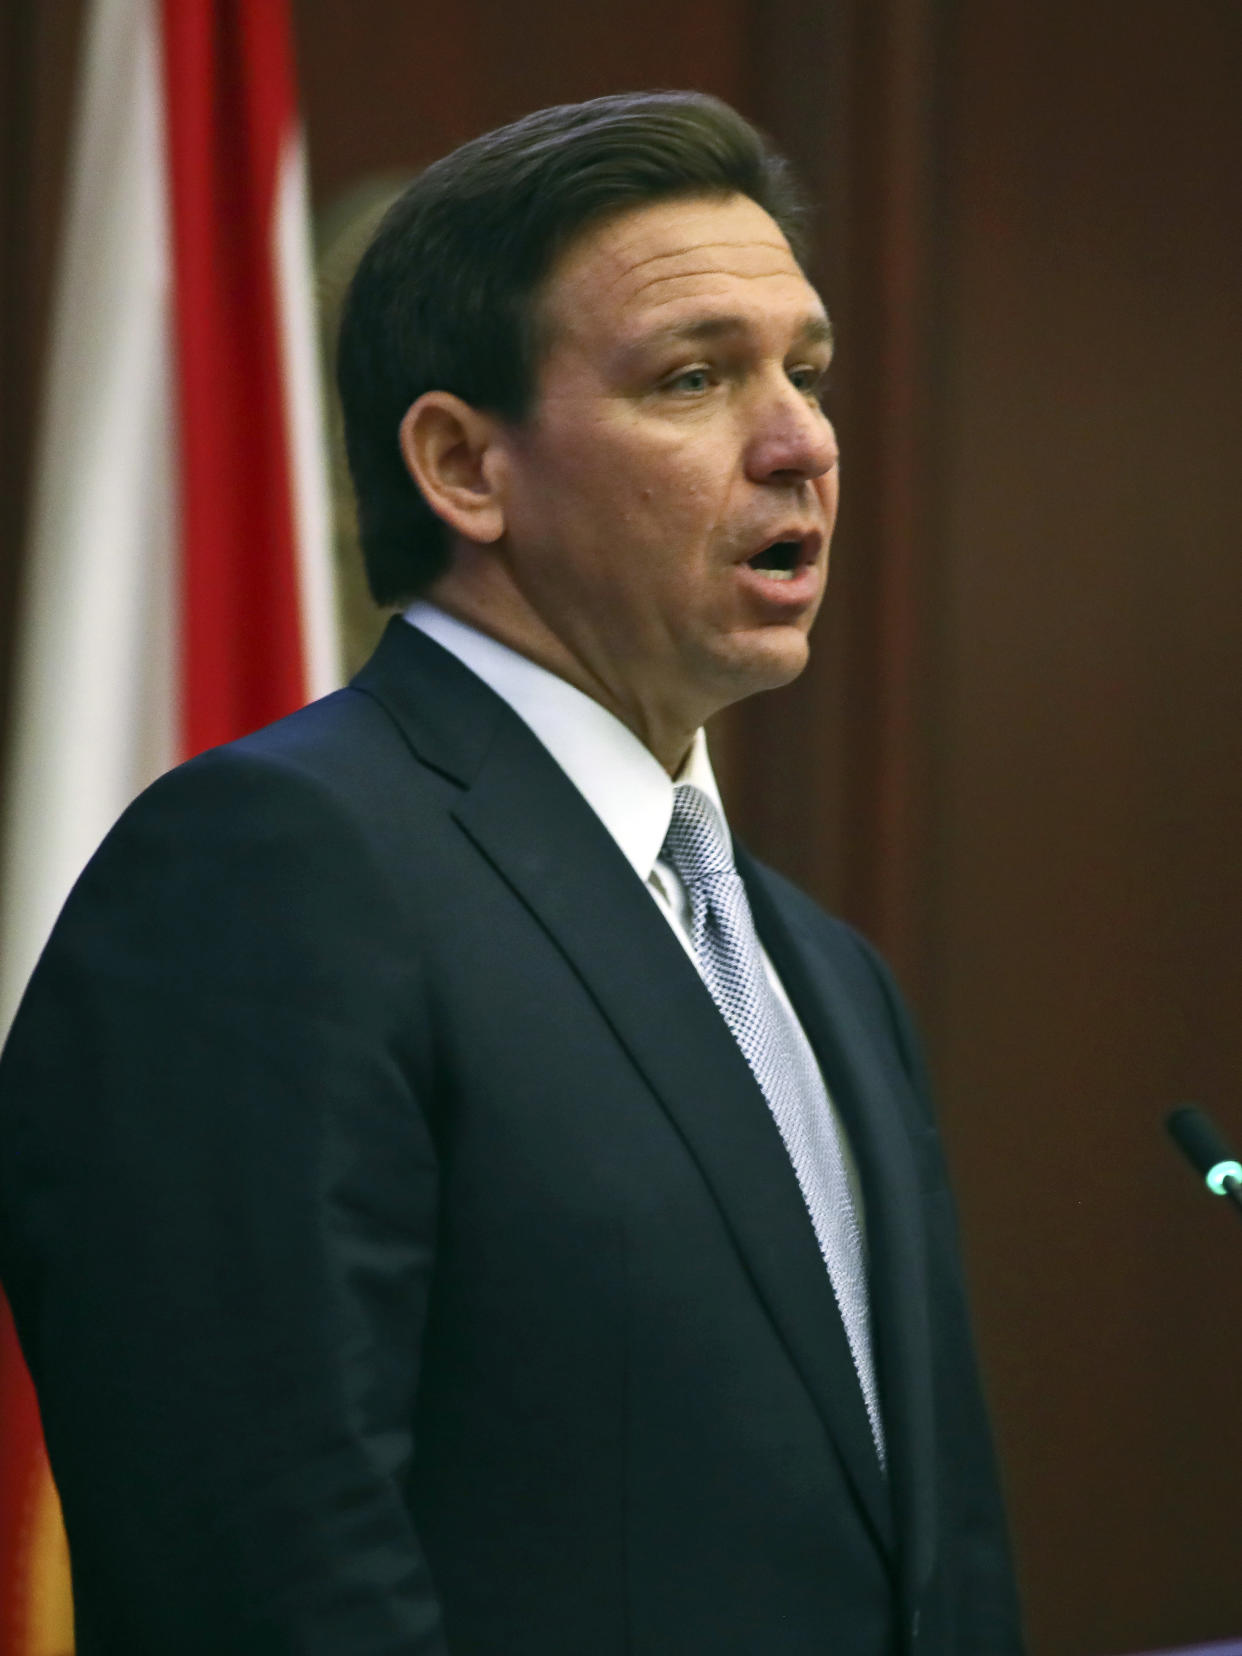 Florida Gov. Ron DeSantis gives his State of the State address during a joint session of the Senate and House of Representatives Tuesday, March 7, 2023, at the Capitol in Tallahassee, Fla. (AP Photo/Phil Sears)